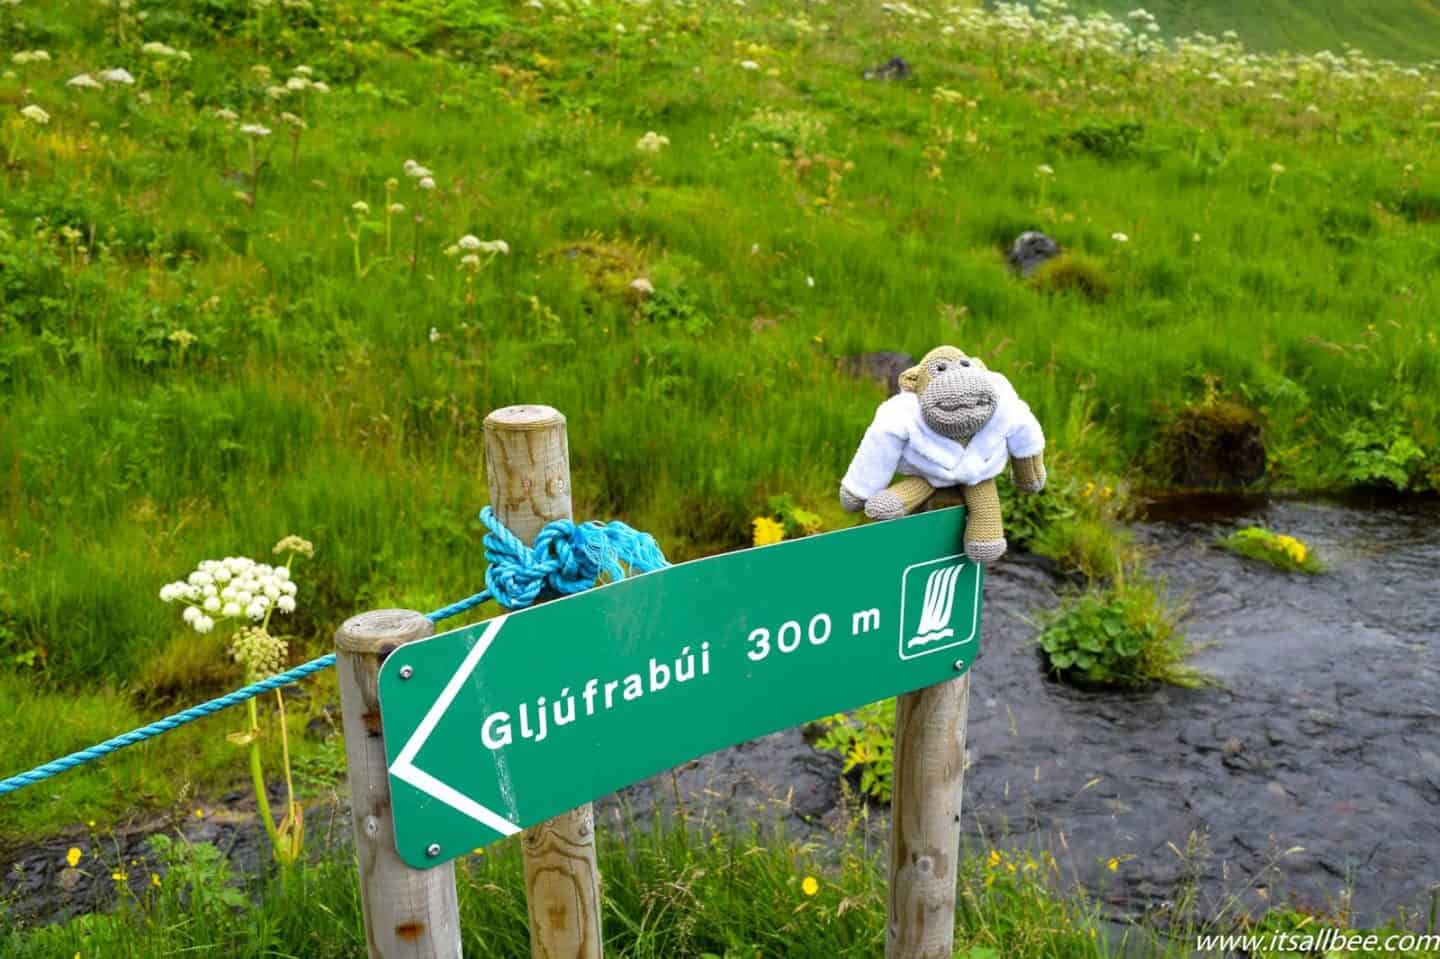 Things to do in Iceland - Hidden Waterfall In Iceland - Gljufrabui - Places to visit in Iceland